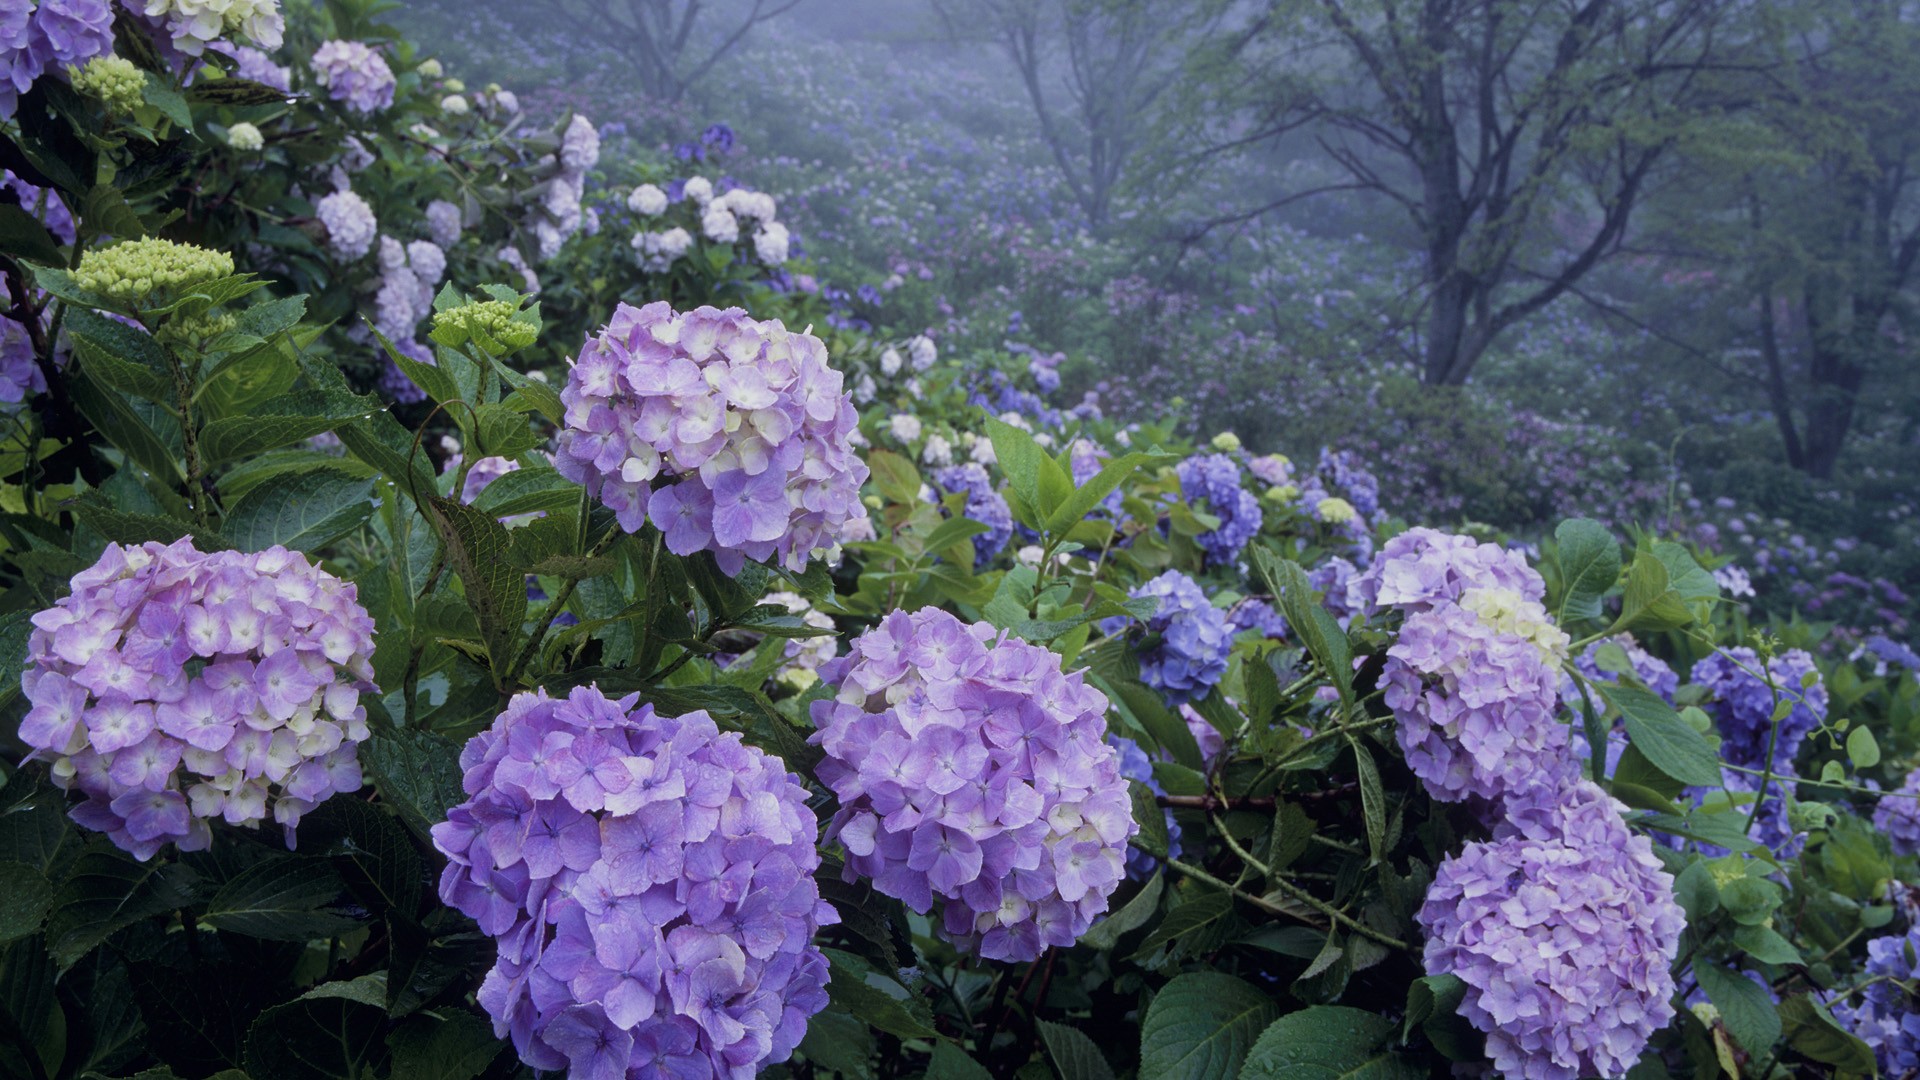 Rate Select Rating Give Hydrangea Flower Park Japan